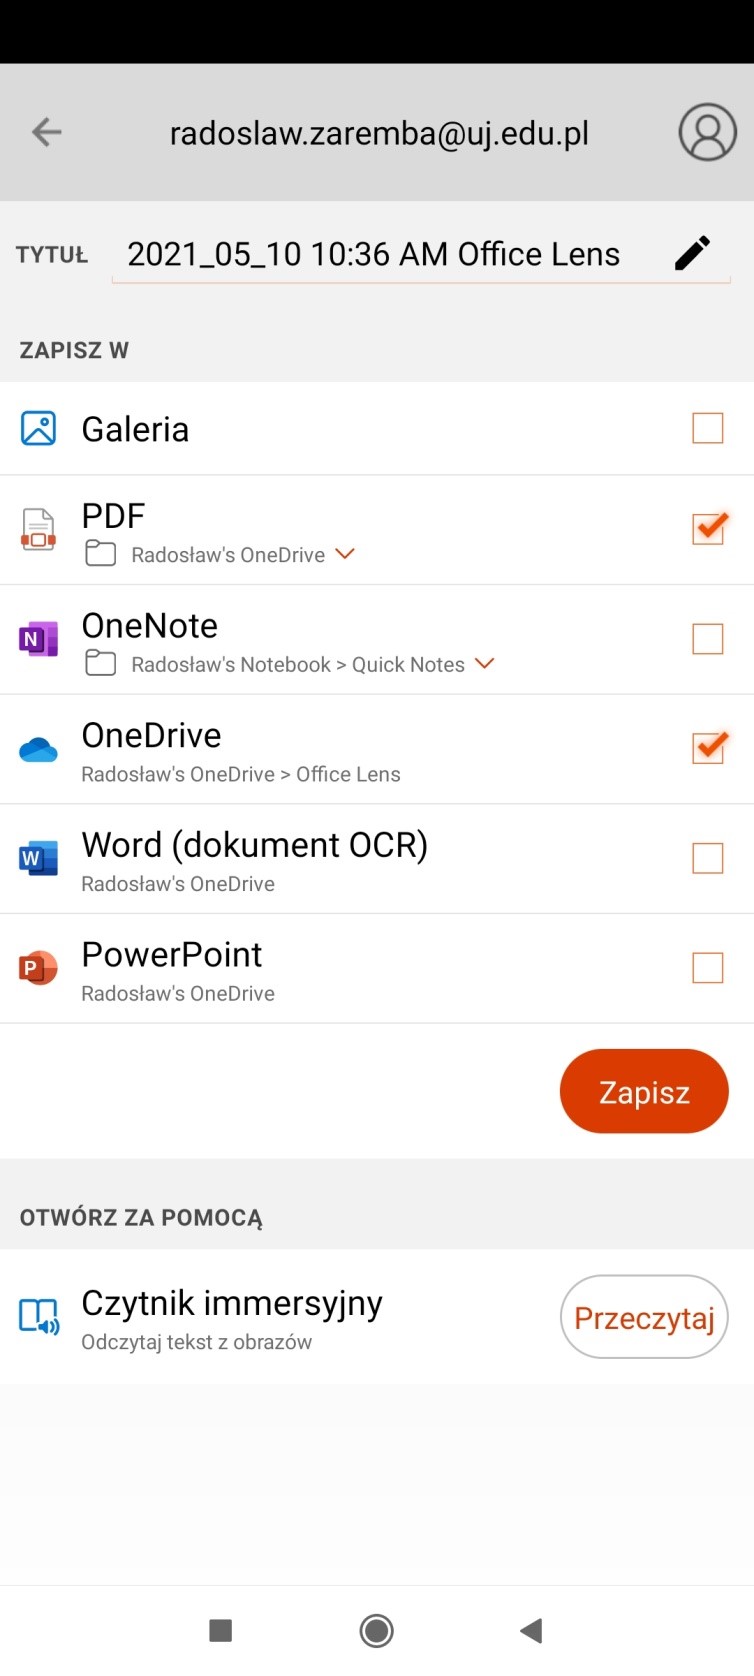 Image 4. Possible formats for saving the document: PDF, OneNote, Word and PowerPoint